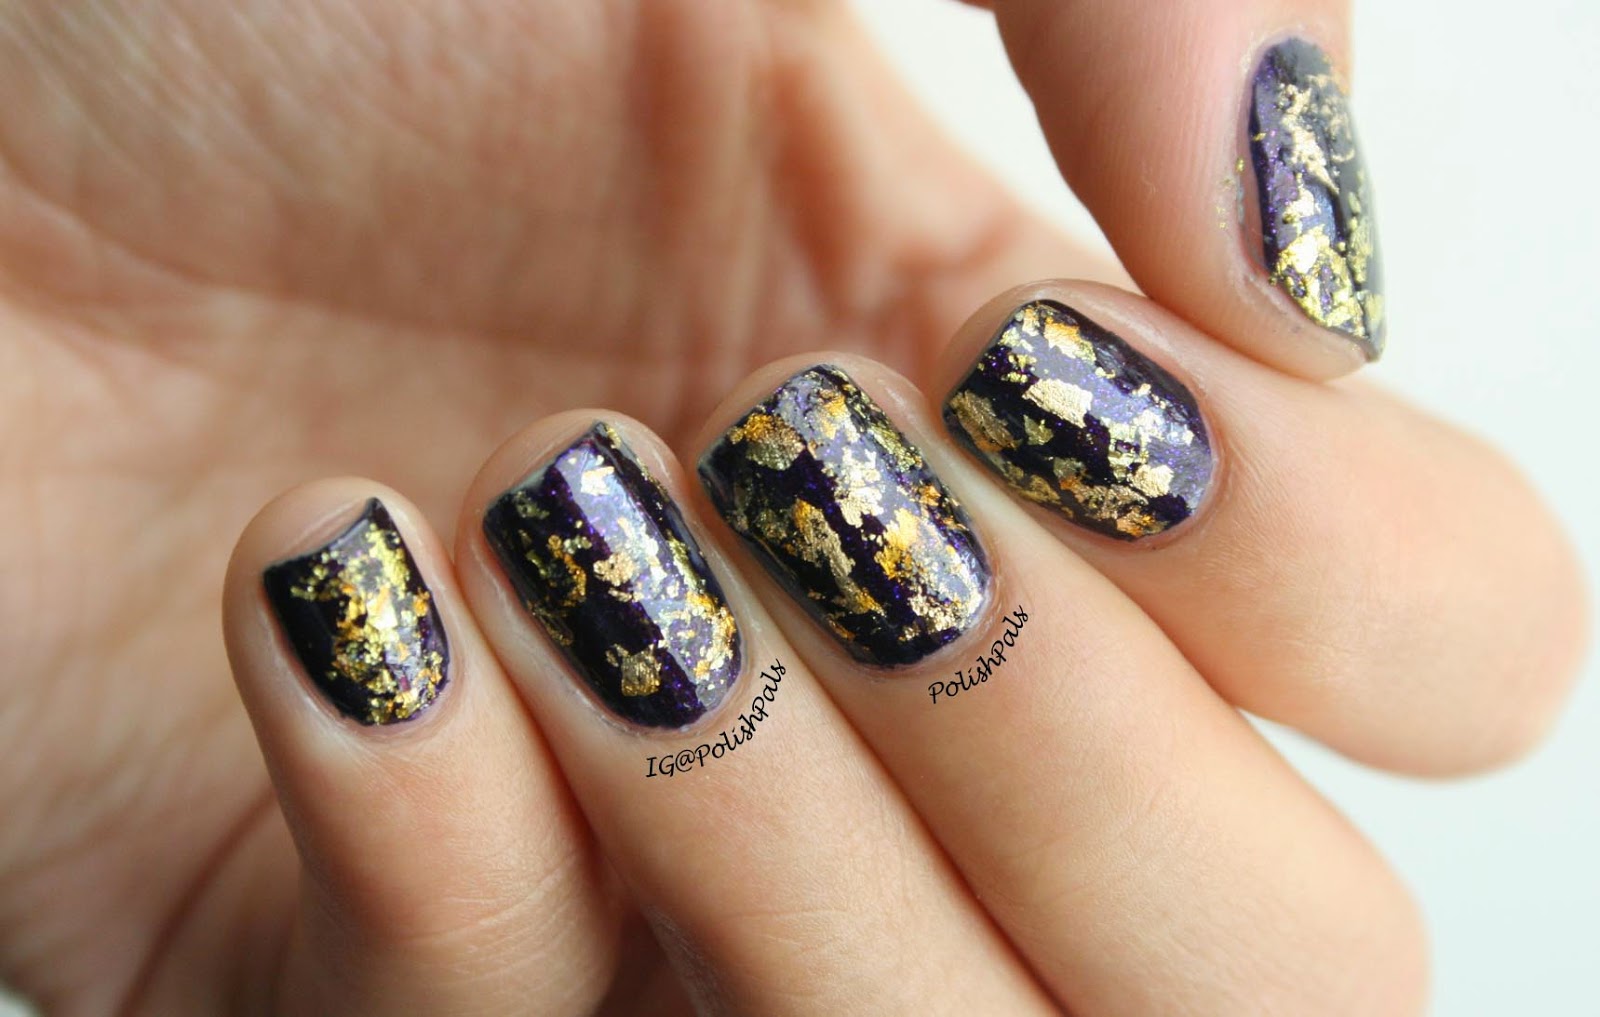 6. Pink and Gold Foil Coffin Nails - wide 7